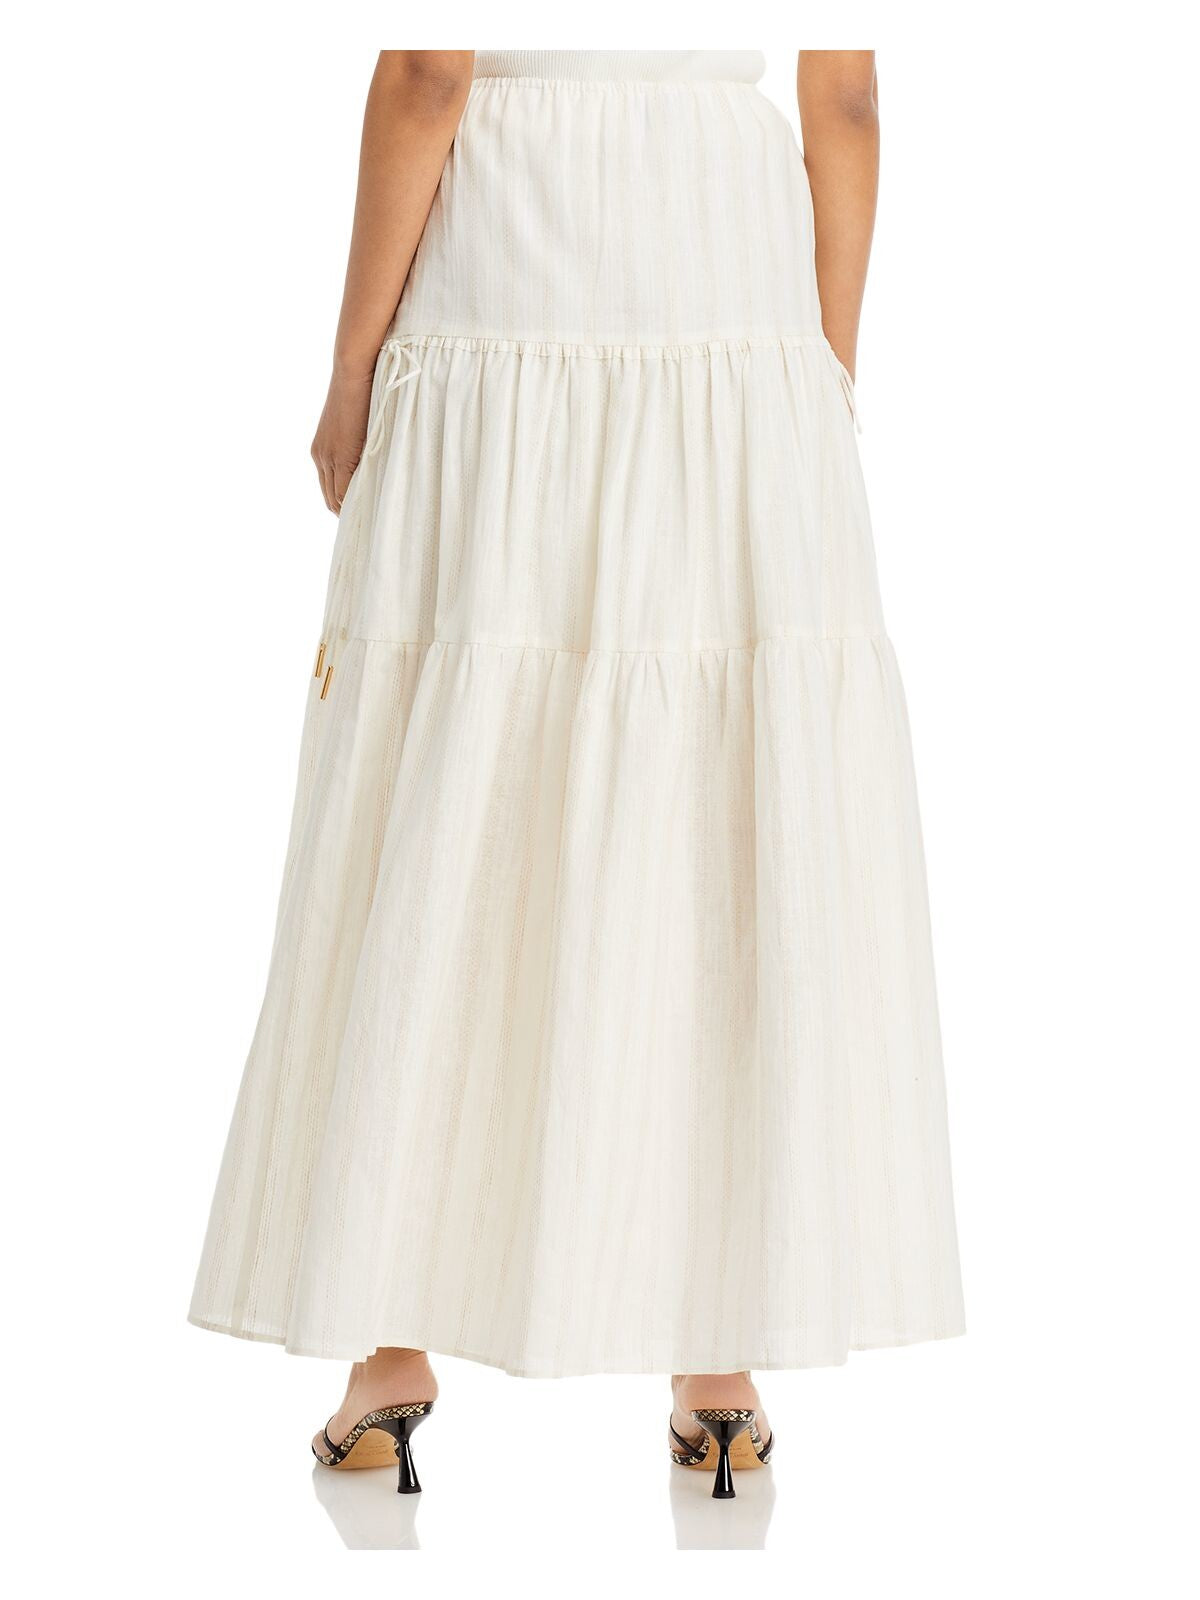 SIGNIFICANT OTHER Womens Ivory Tie Maxi Skirt 2